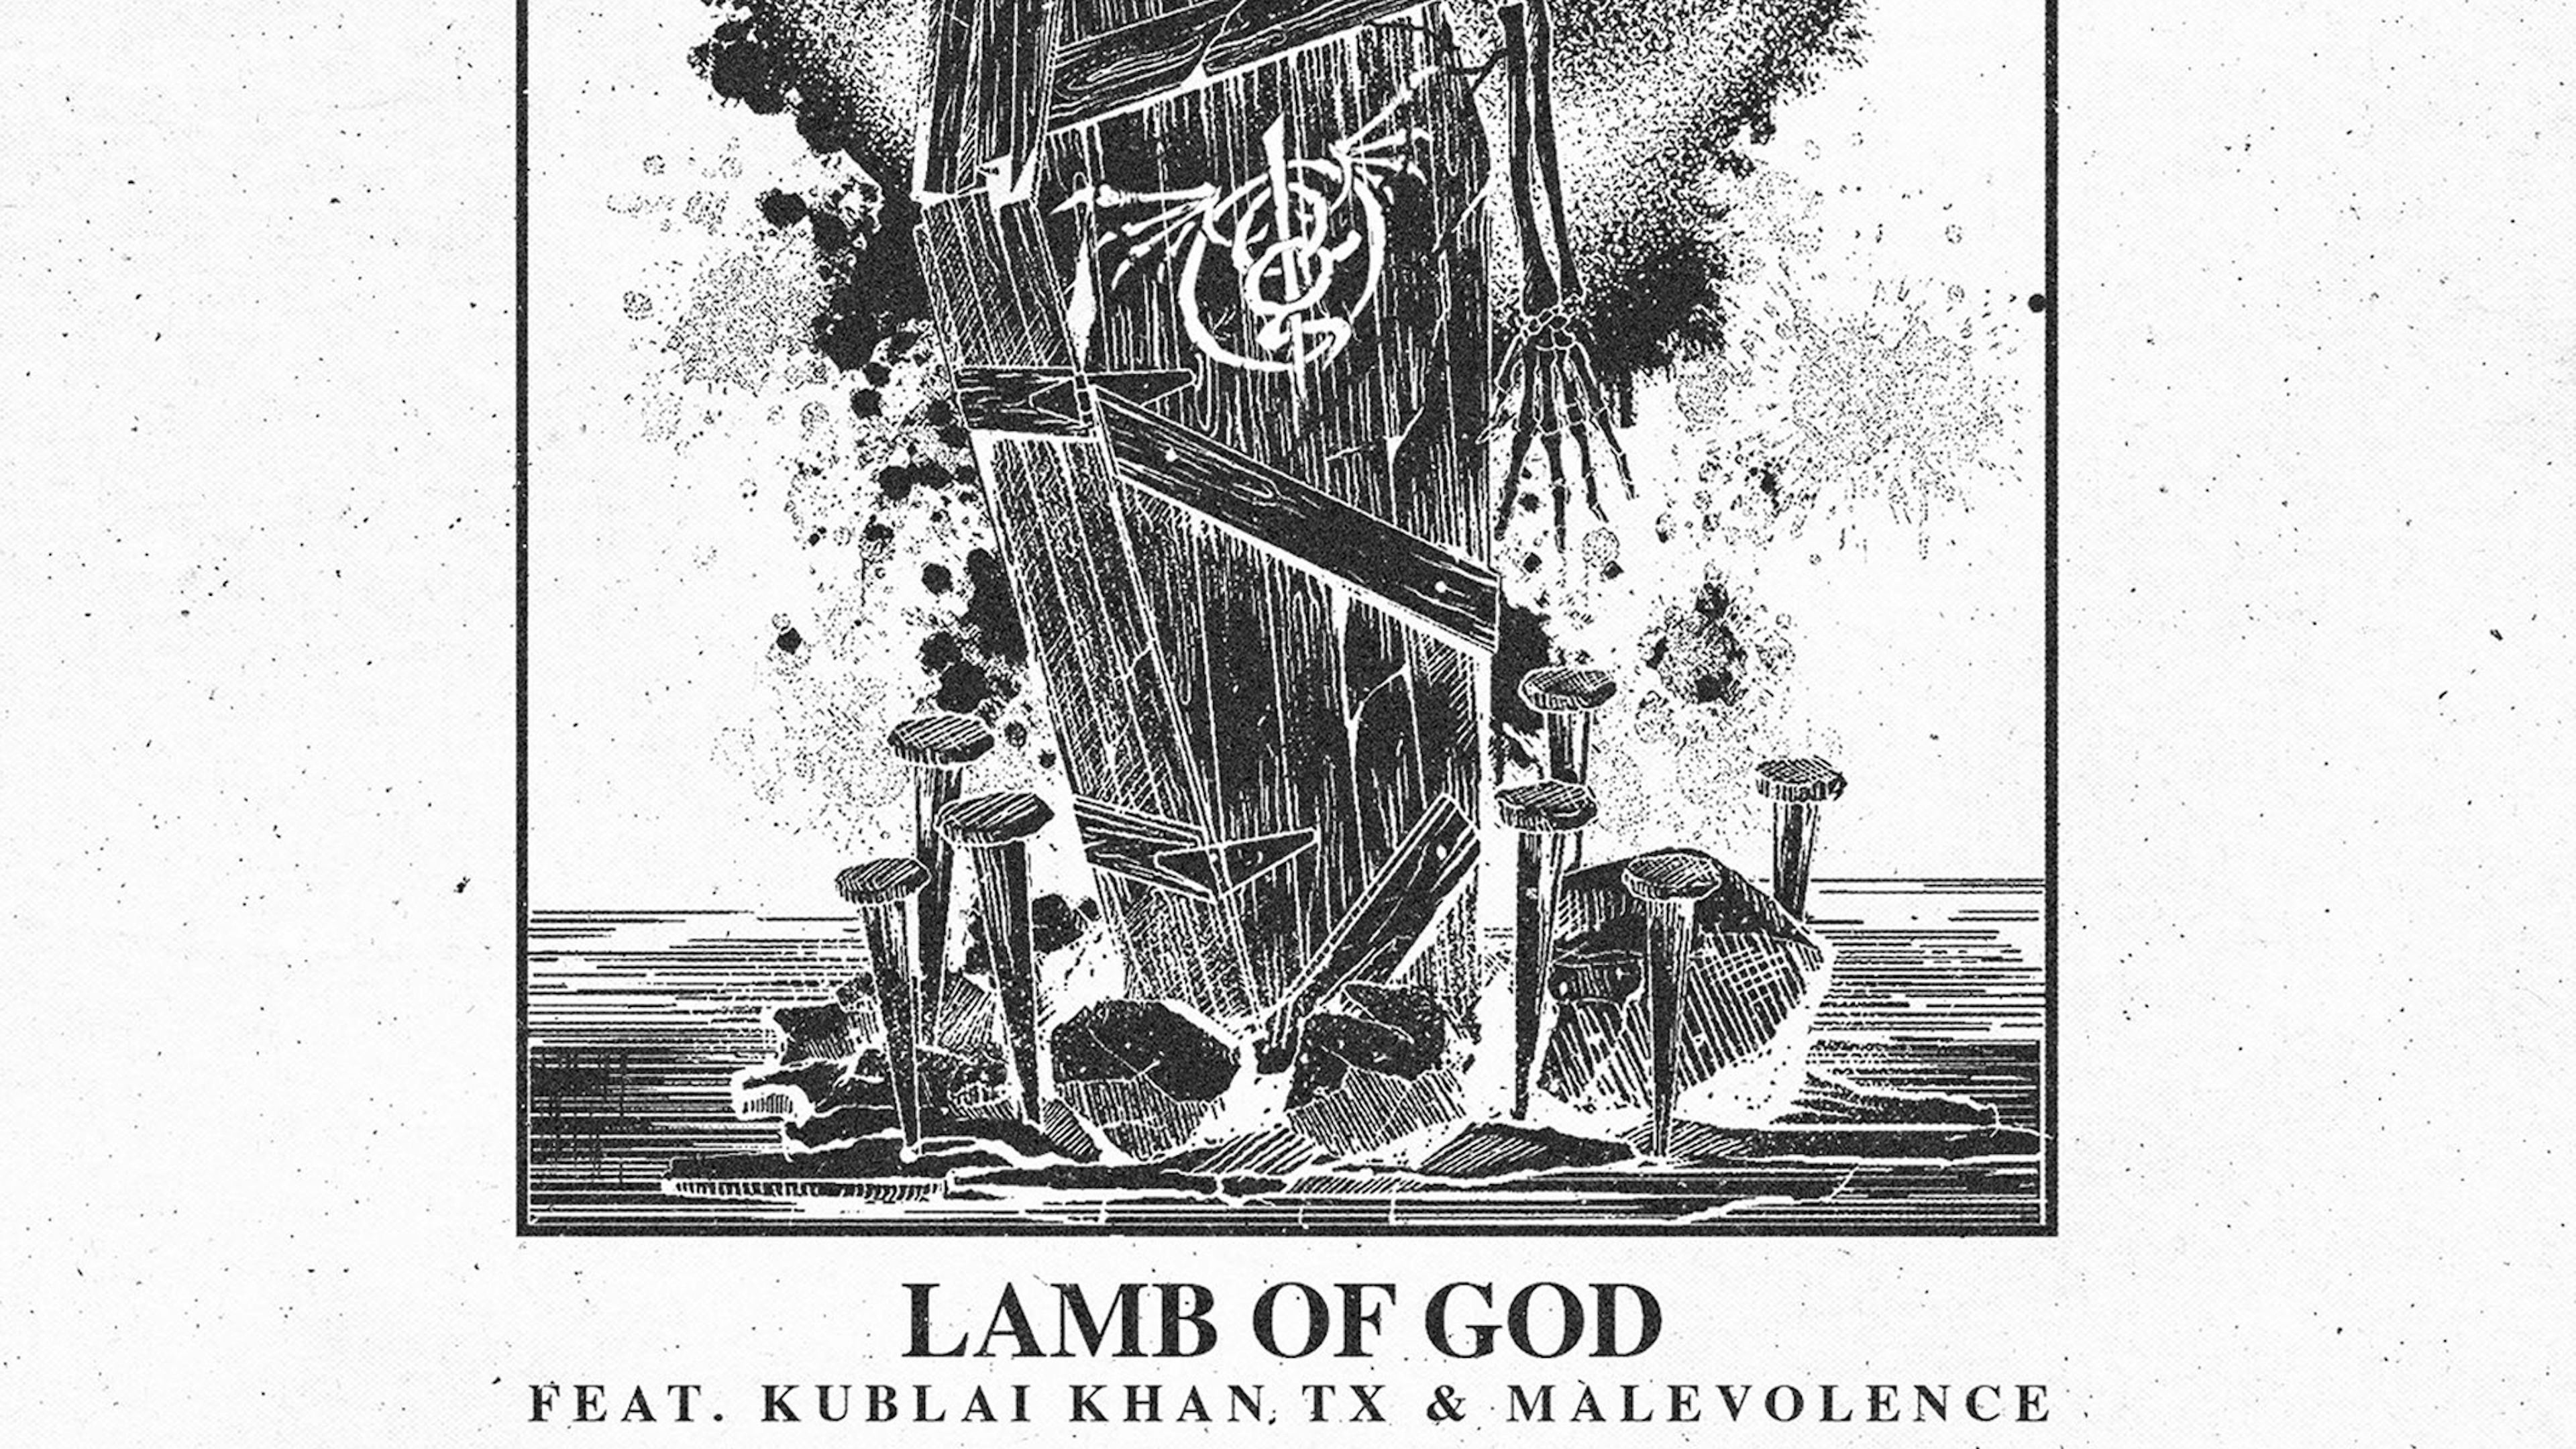 Lamb Of God re-release Another Nail For Your Coffin with Kublai Khan TX and Malevolence